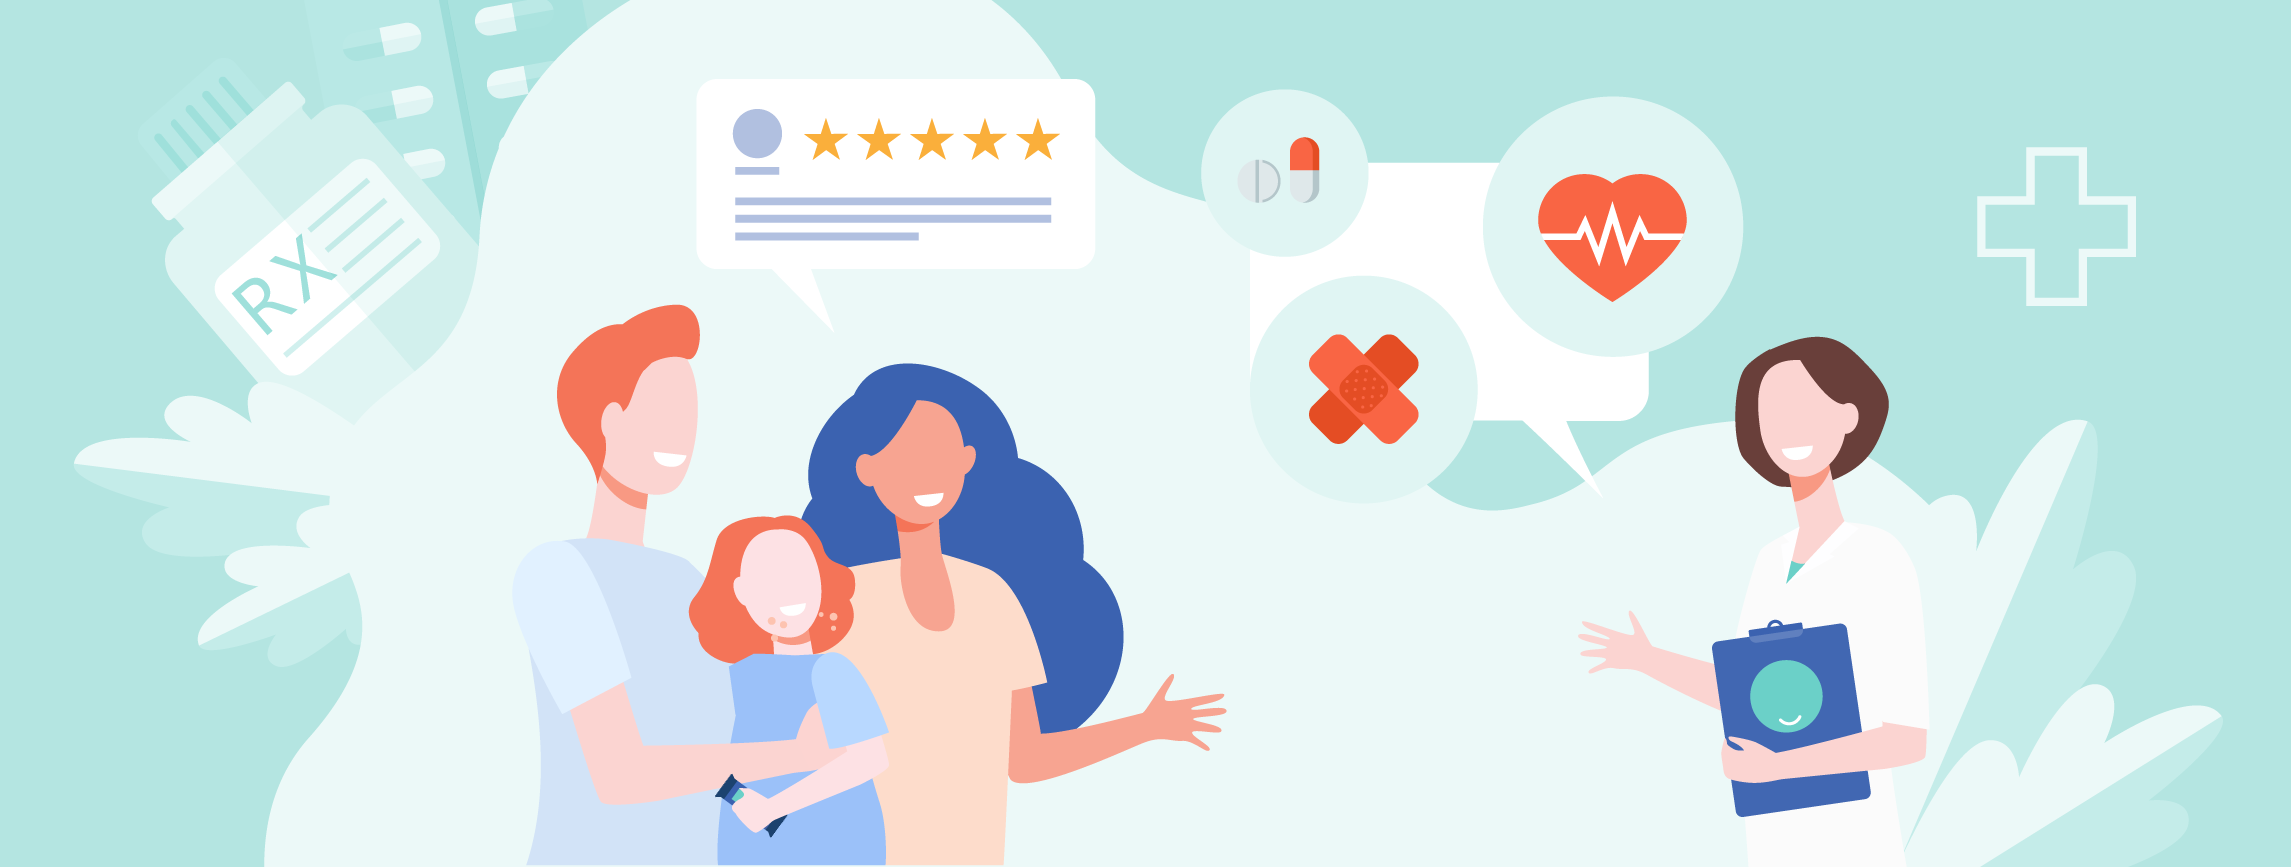 Patient feedback: The key to advancing the patient experience